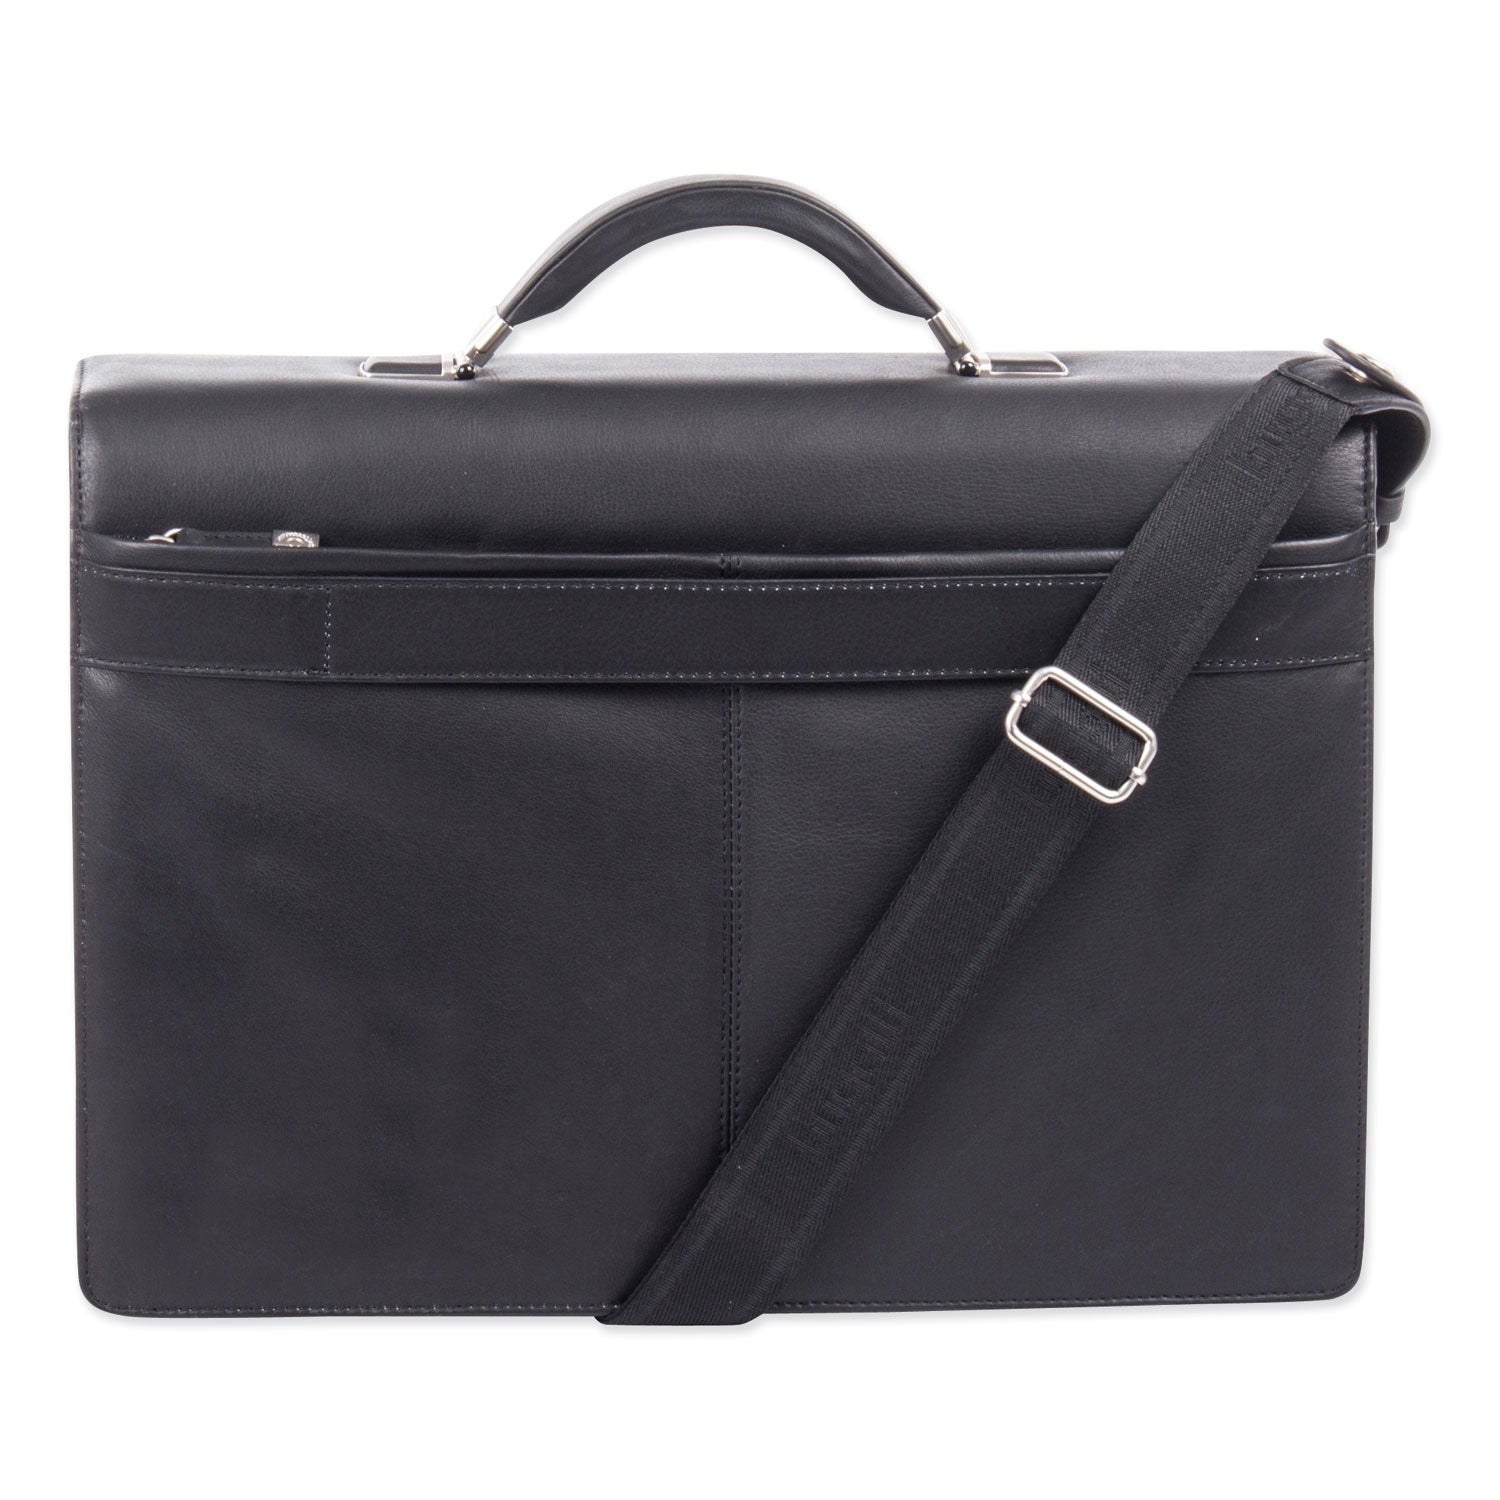 milestone-briefcase-fits-devices-up-to-156-leather-5-x-5-x-12-black_swz49545801sm - 2